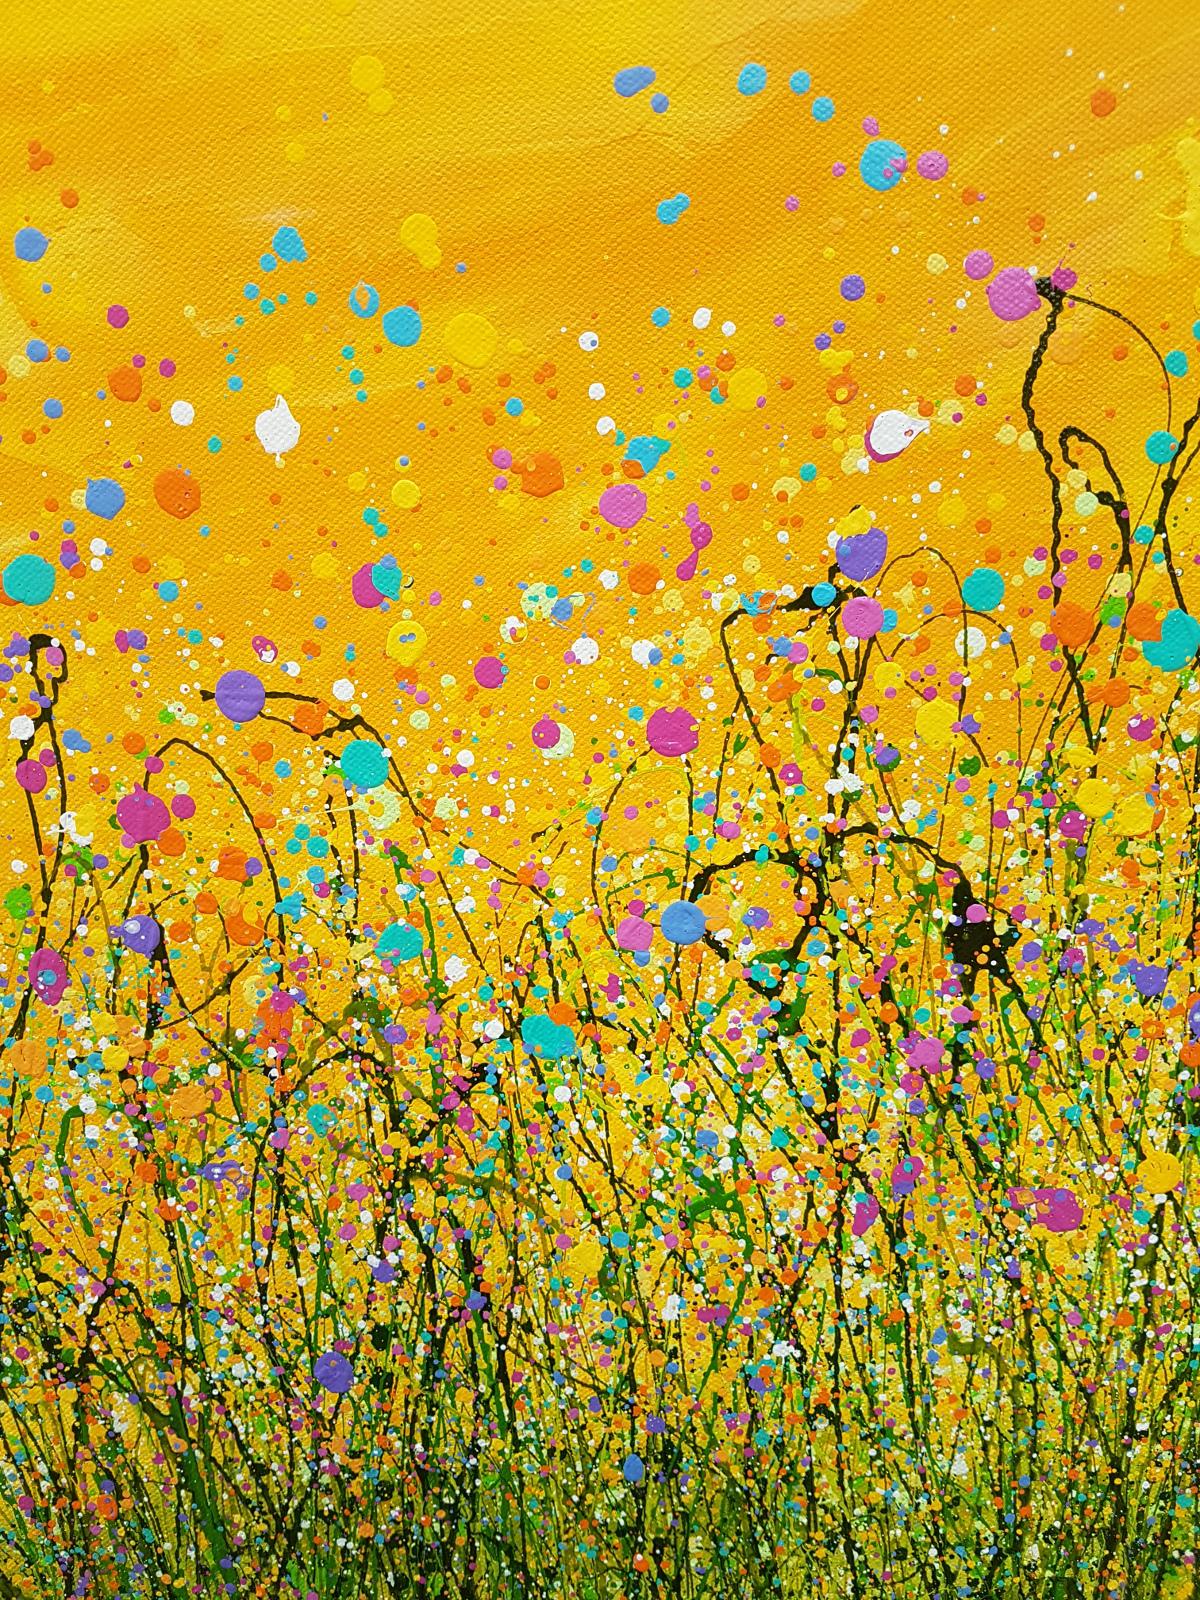 Where Dreams Are Made #4 - Yellow Abstract Painting by Lucy Moore